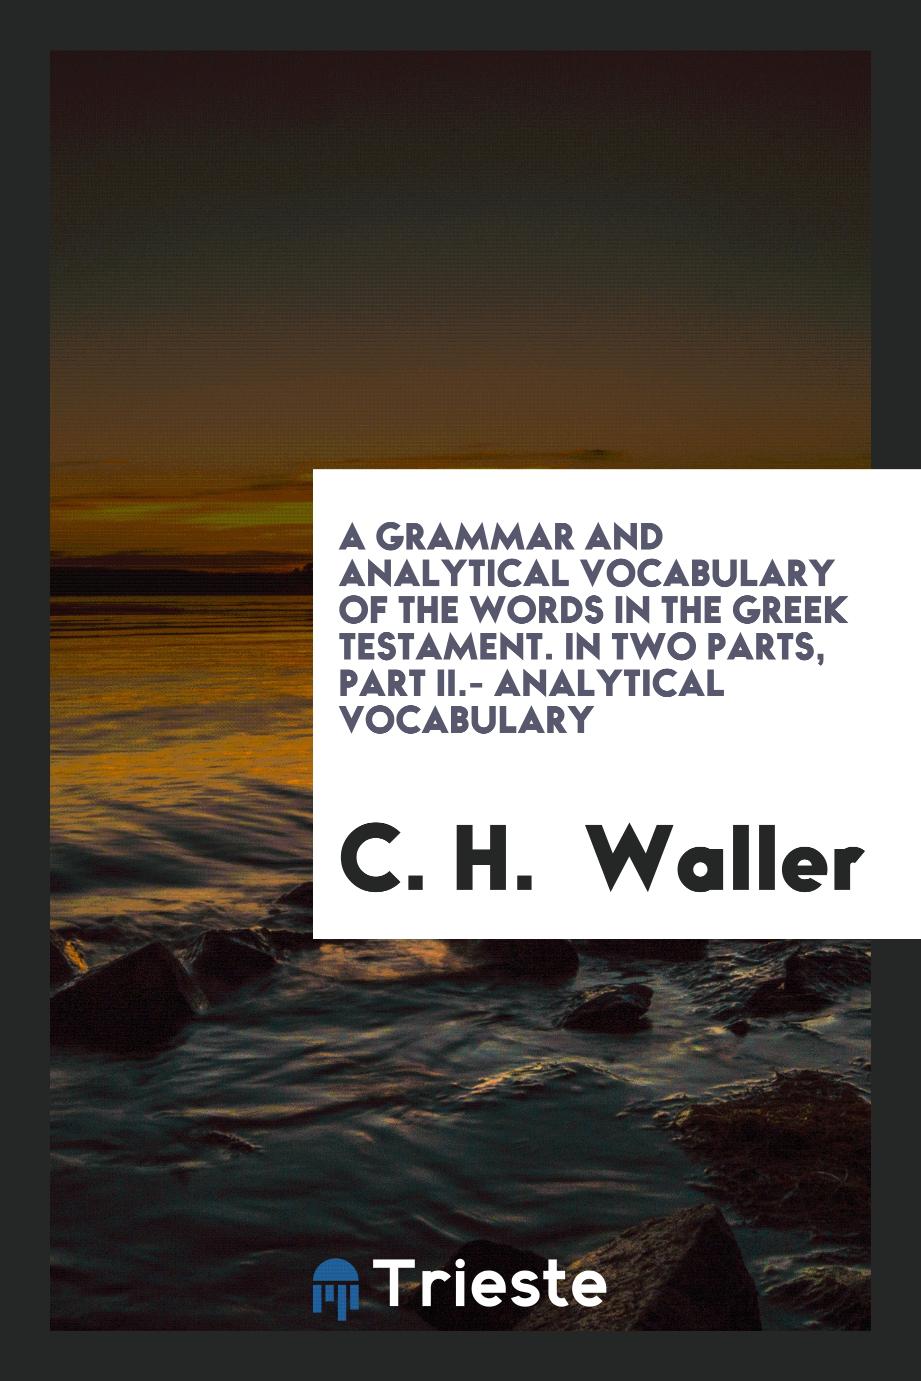 A Grammar and Analytical Vocabulary of the Words in the Greek Testament. In Two Parts, Part II.- Analytical Vocabulary